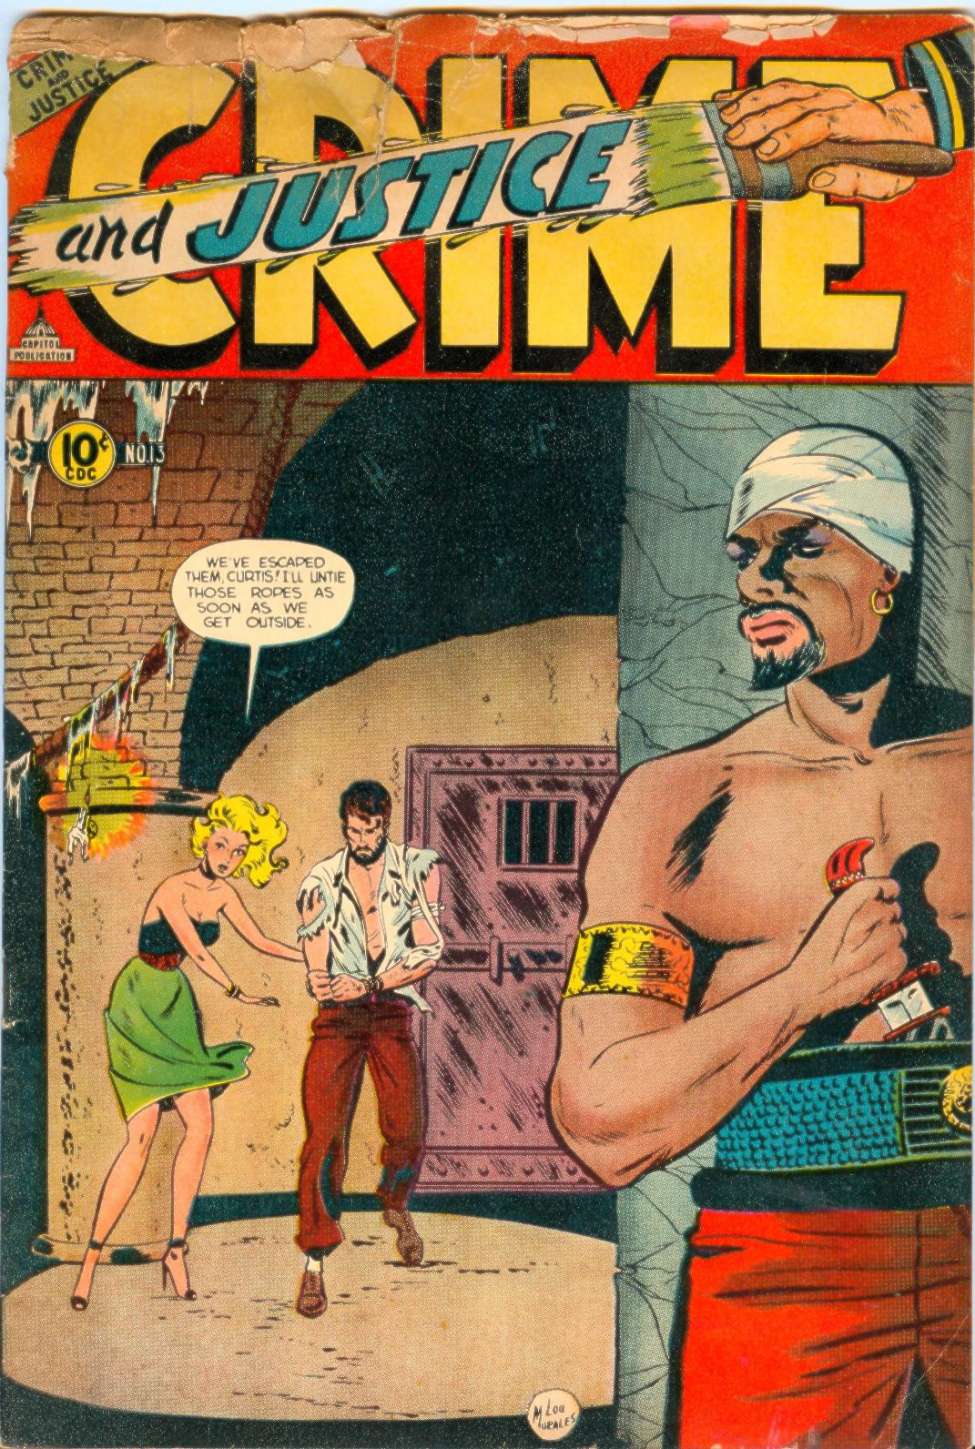 Book Cover For Crime And Justice 13